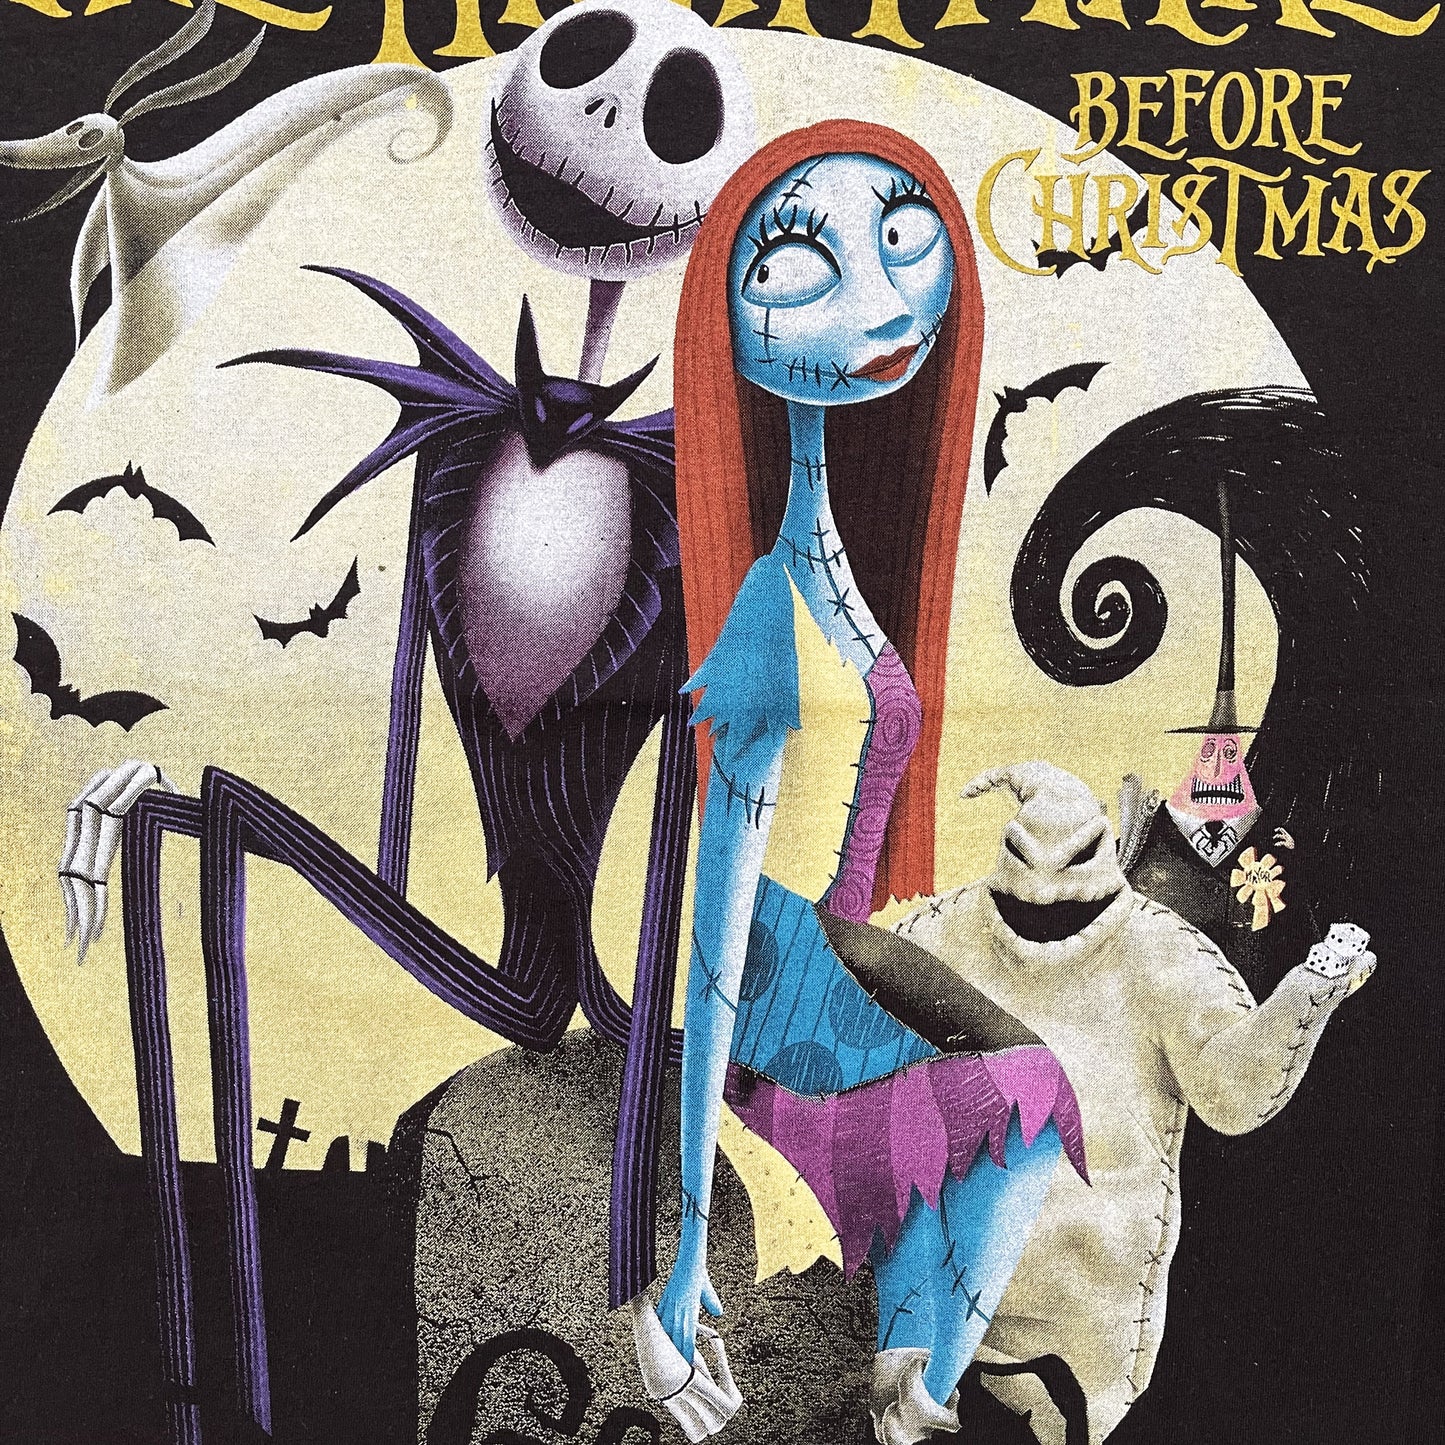 The Nightmare Before Christmas T-Shirt - XL